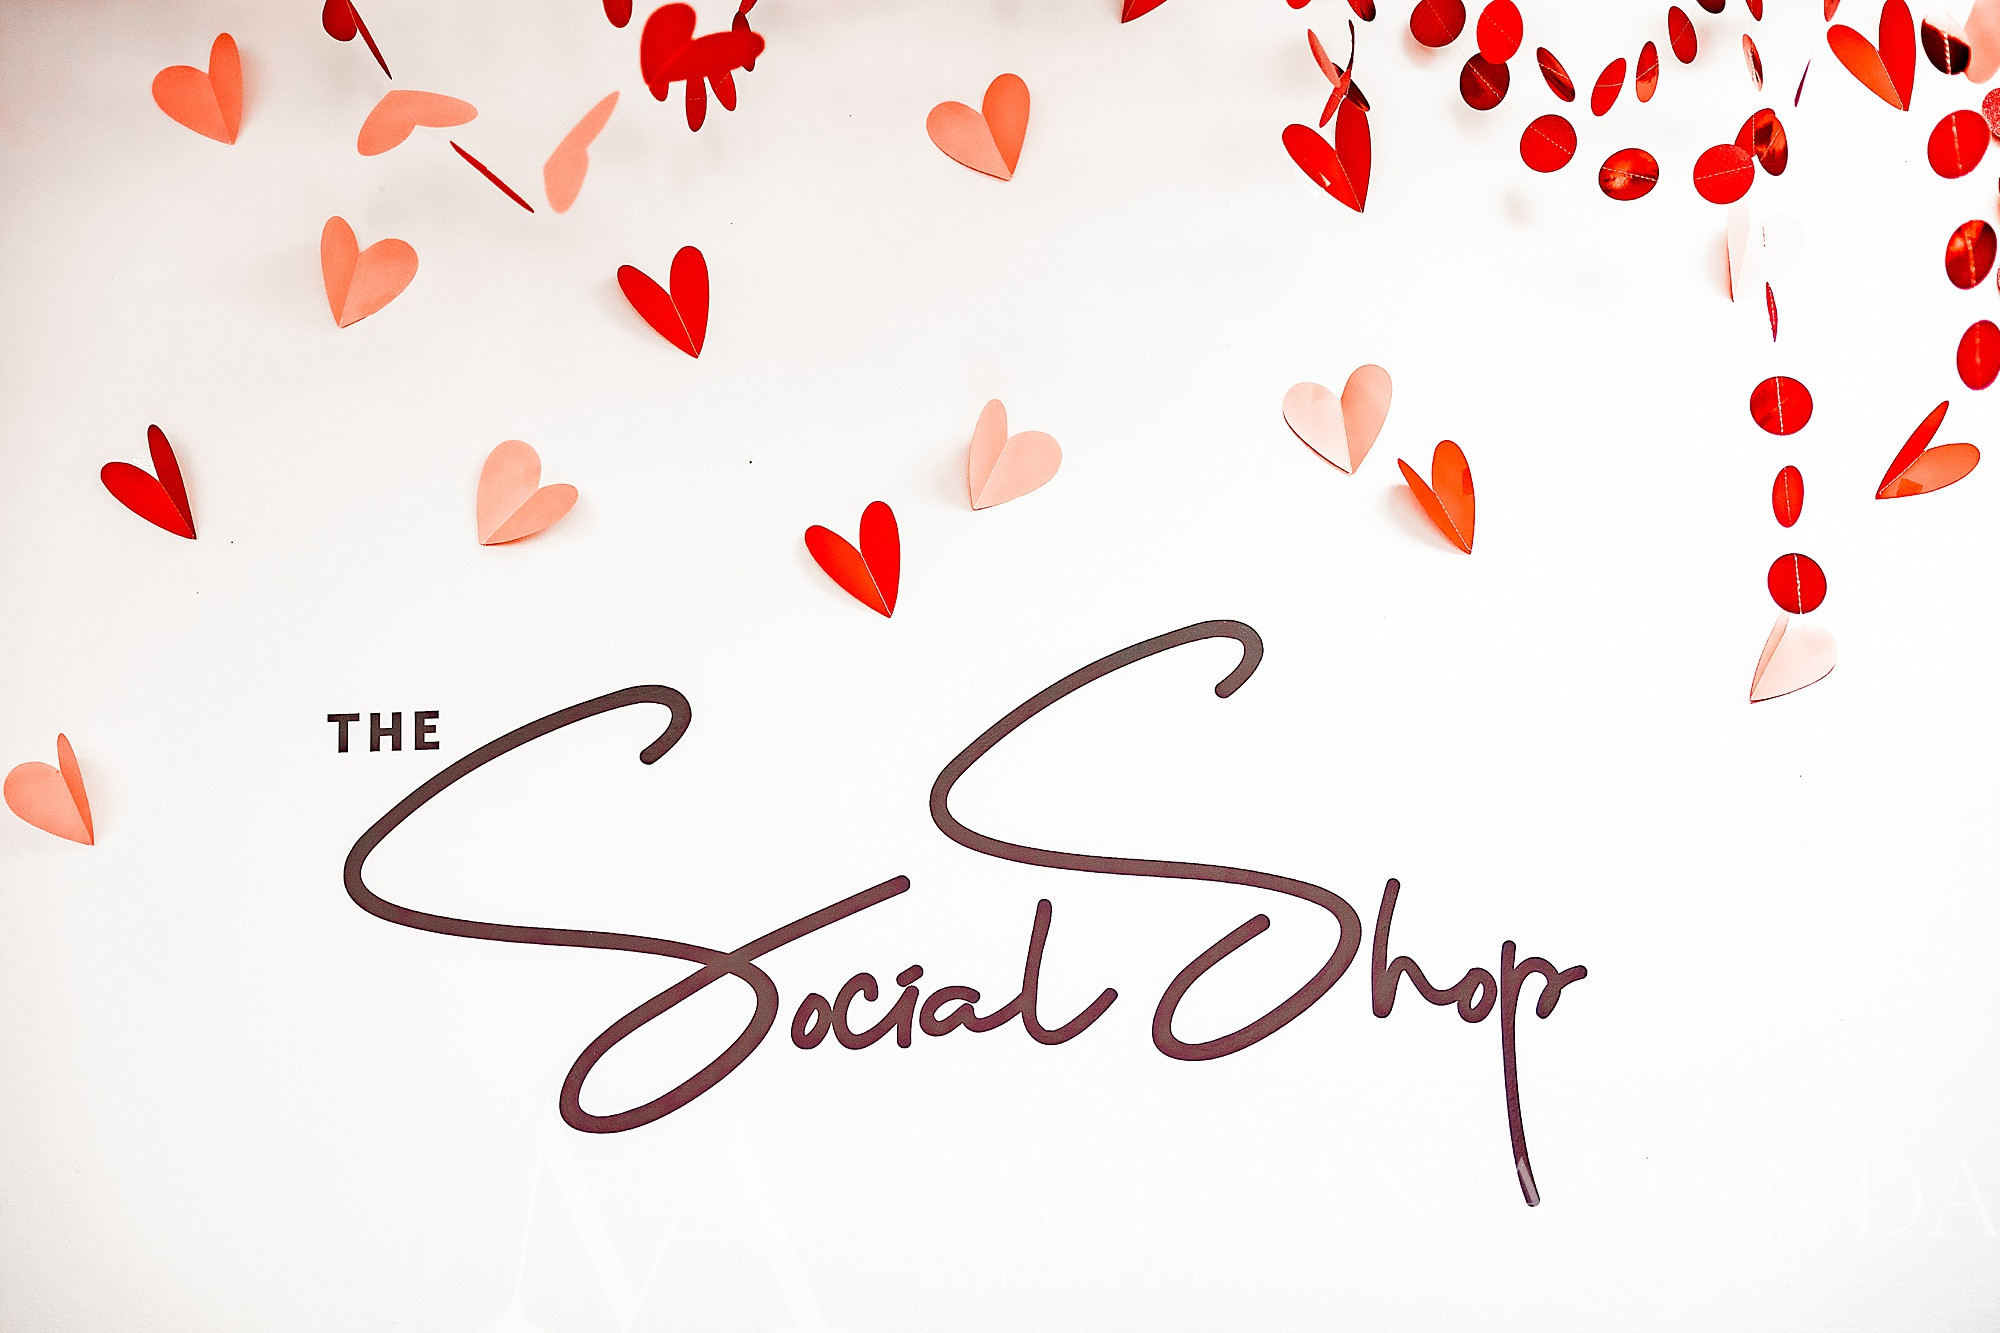 The Social Shop: a local Charlotte owned business 